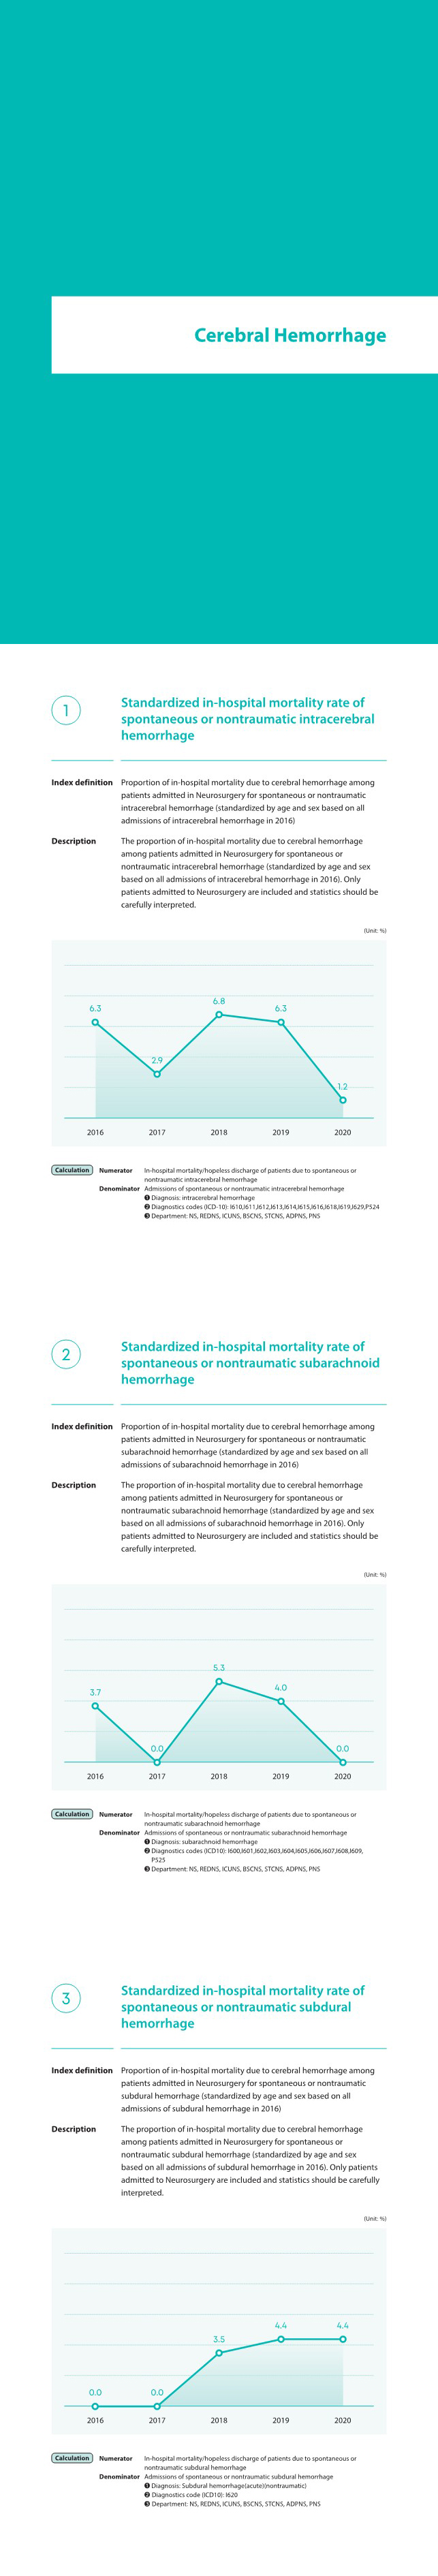 cerebral hemorrhage, Proportion of in-hospital mortality due to cerebral hemorrhage among patients admitted in Neurosurgery for spontaneous or nontraumatic intracerebral hemorrhage (standardized by age and sex based on all admissions of intracerebral hemorrhage in 2016), The proportion of in-hospital mortality due to cerebral hemorrhage among patients admitted in Neurosurgery for spontaneous or nontraumatic intracerebral hemorrhage (standardized by age and sex based on all admissions of intracerebral hemorrhage in 2016). Only patients admitted to Neurosurgery are included and statistics should be carefully interpreted.